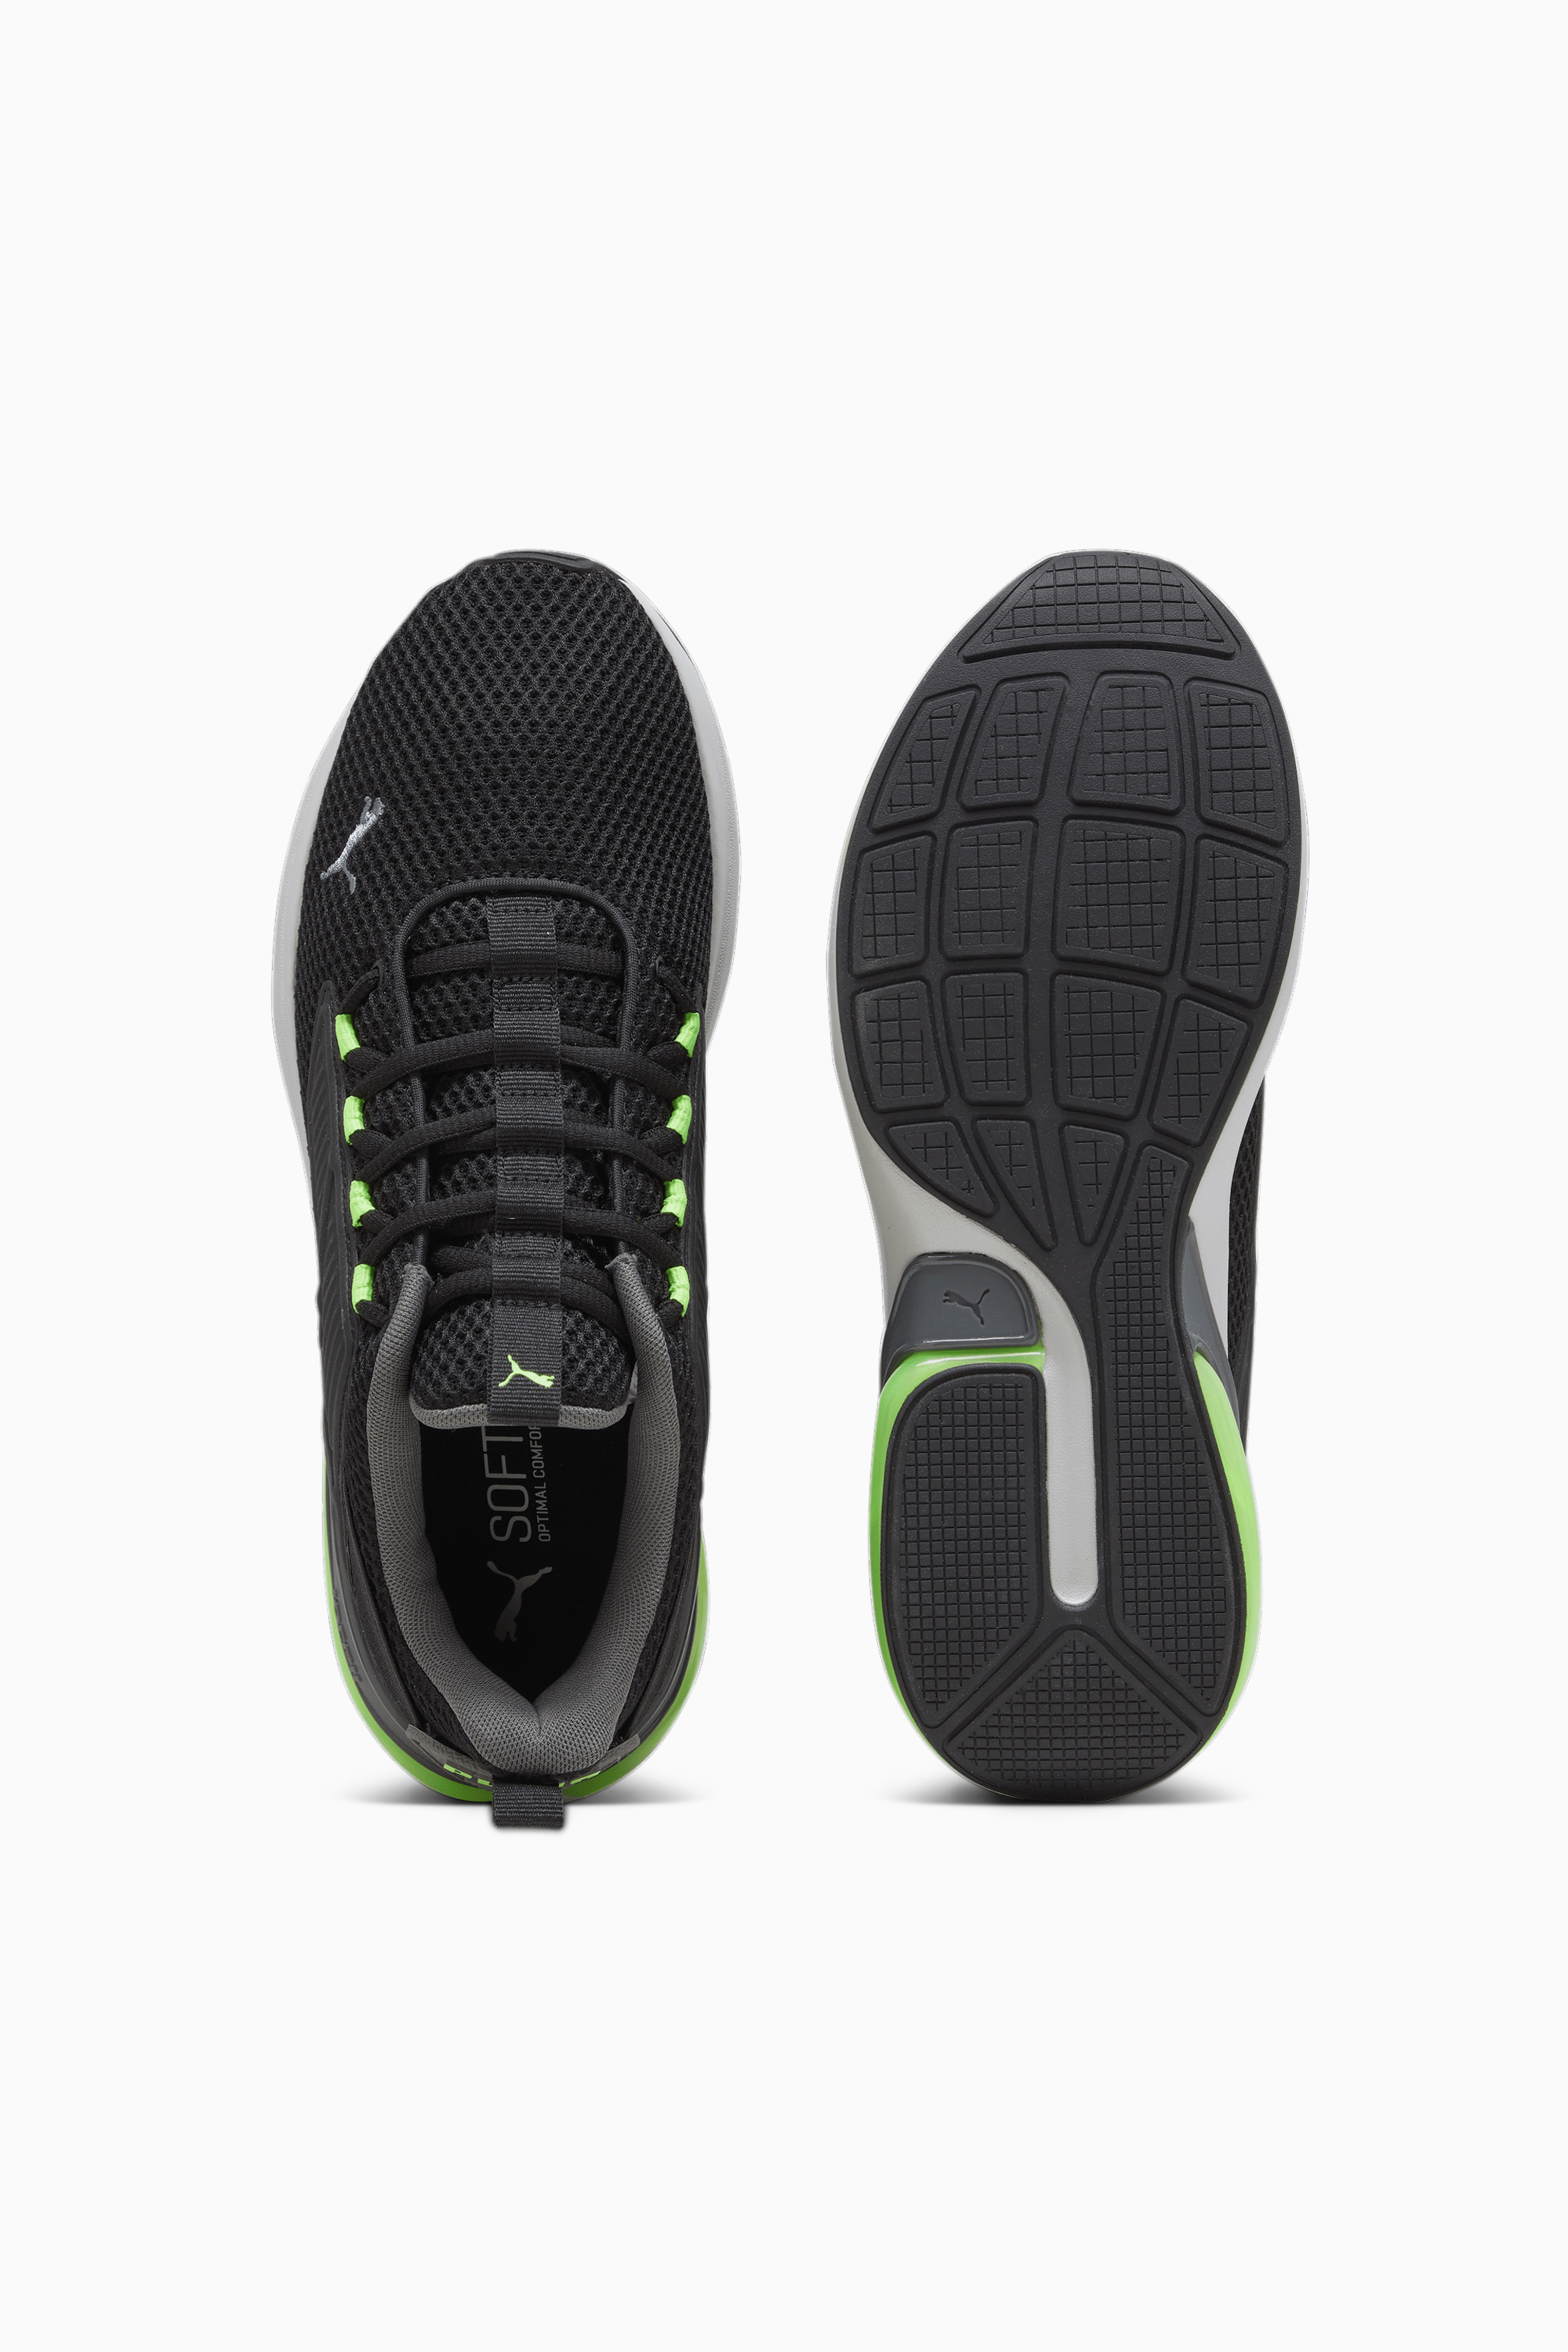 PUMA Cell Rapid Running Shoes